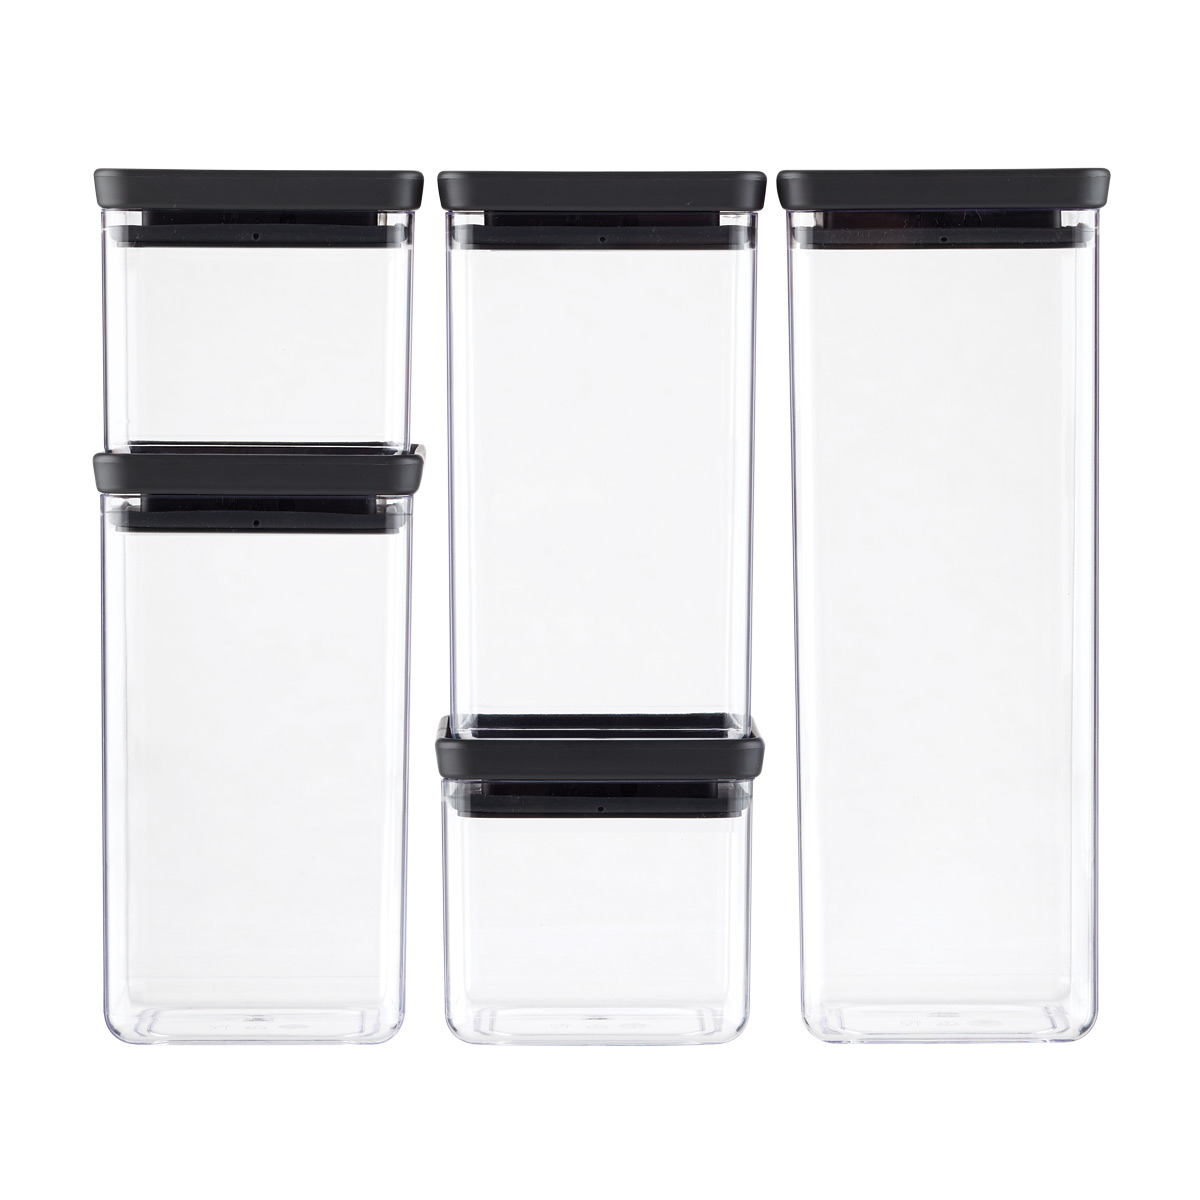 https://www.containerstore.com/catalogimages/383250/10079766-5-Piece-Cannister-Set-graph.jpg